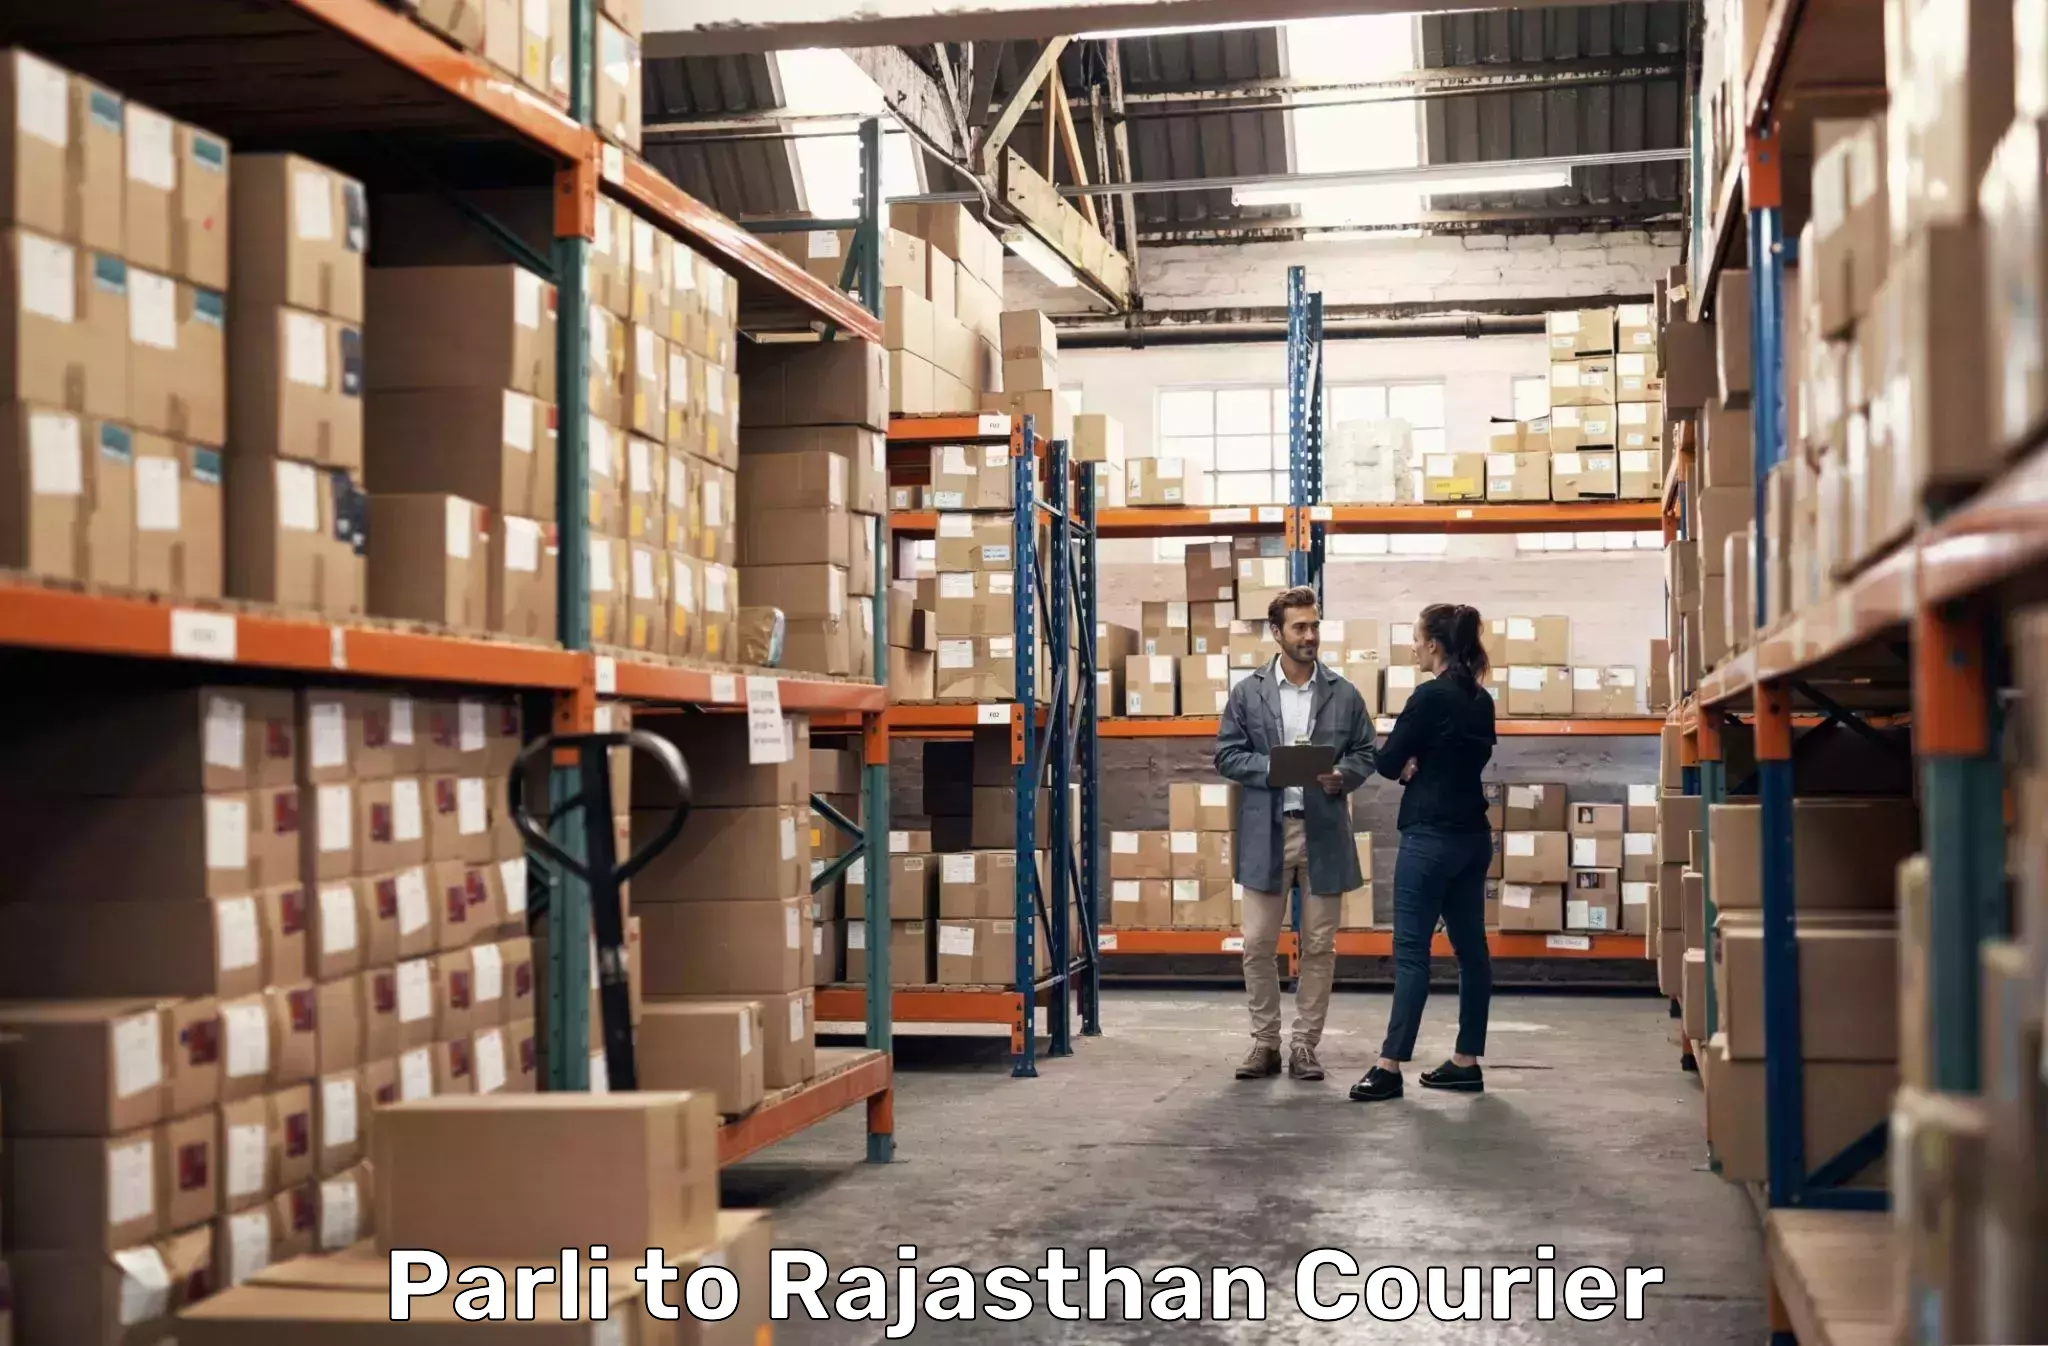 Courier service booking Parli to Rajasthan